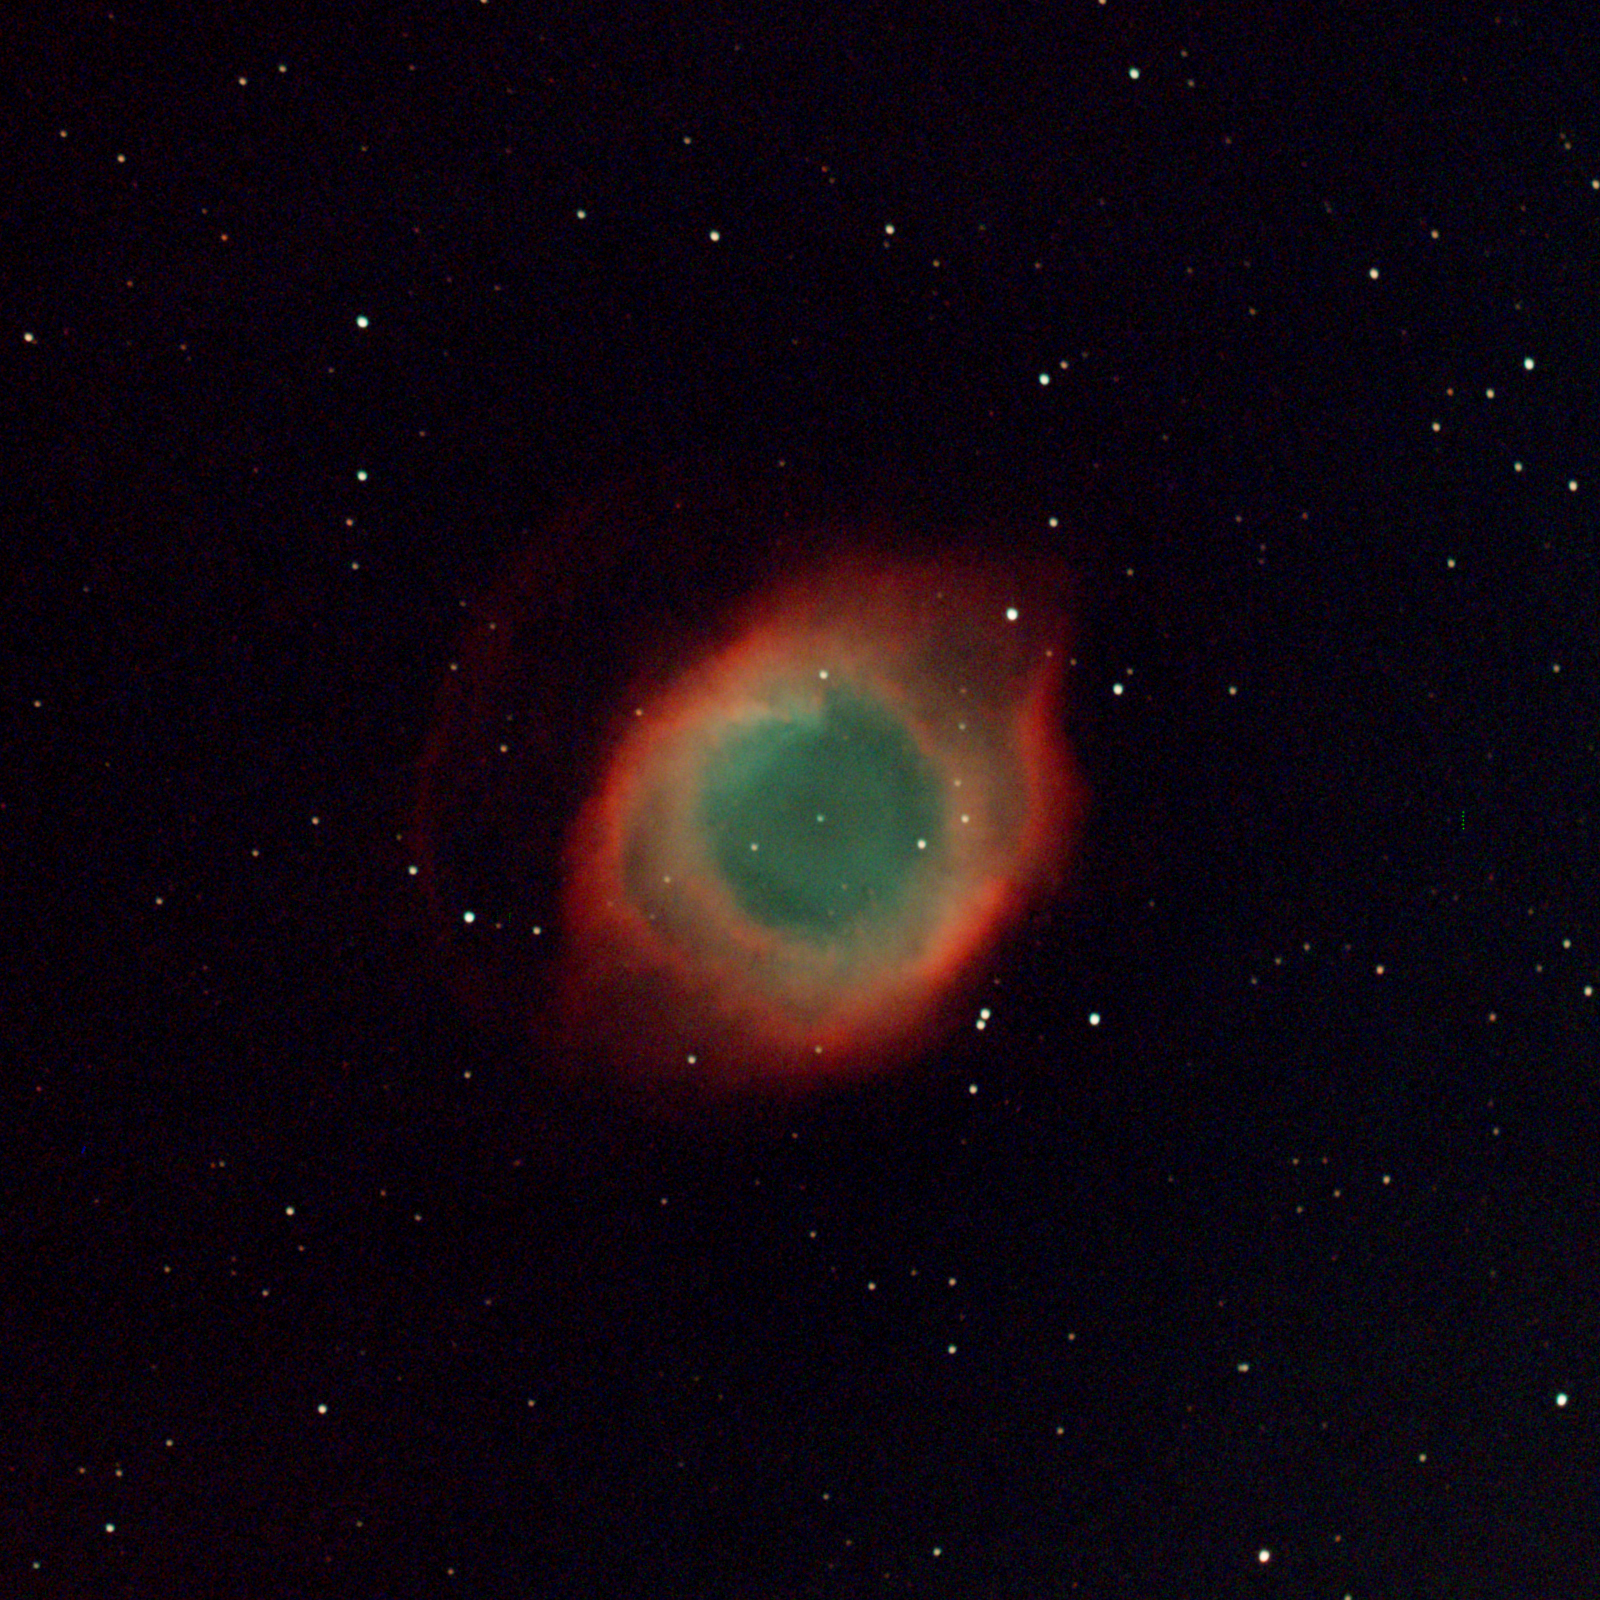 NGC7293 c11f2 294 g300 Br8 30F 900S NoEdit 09212022m